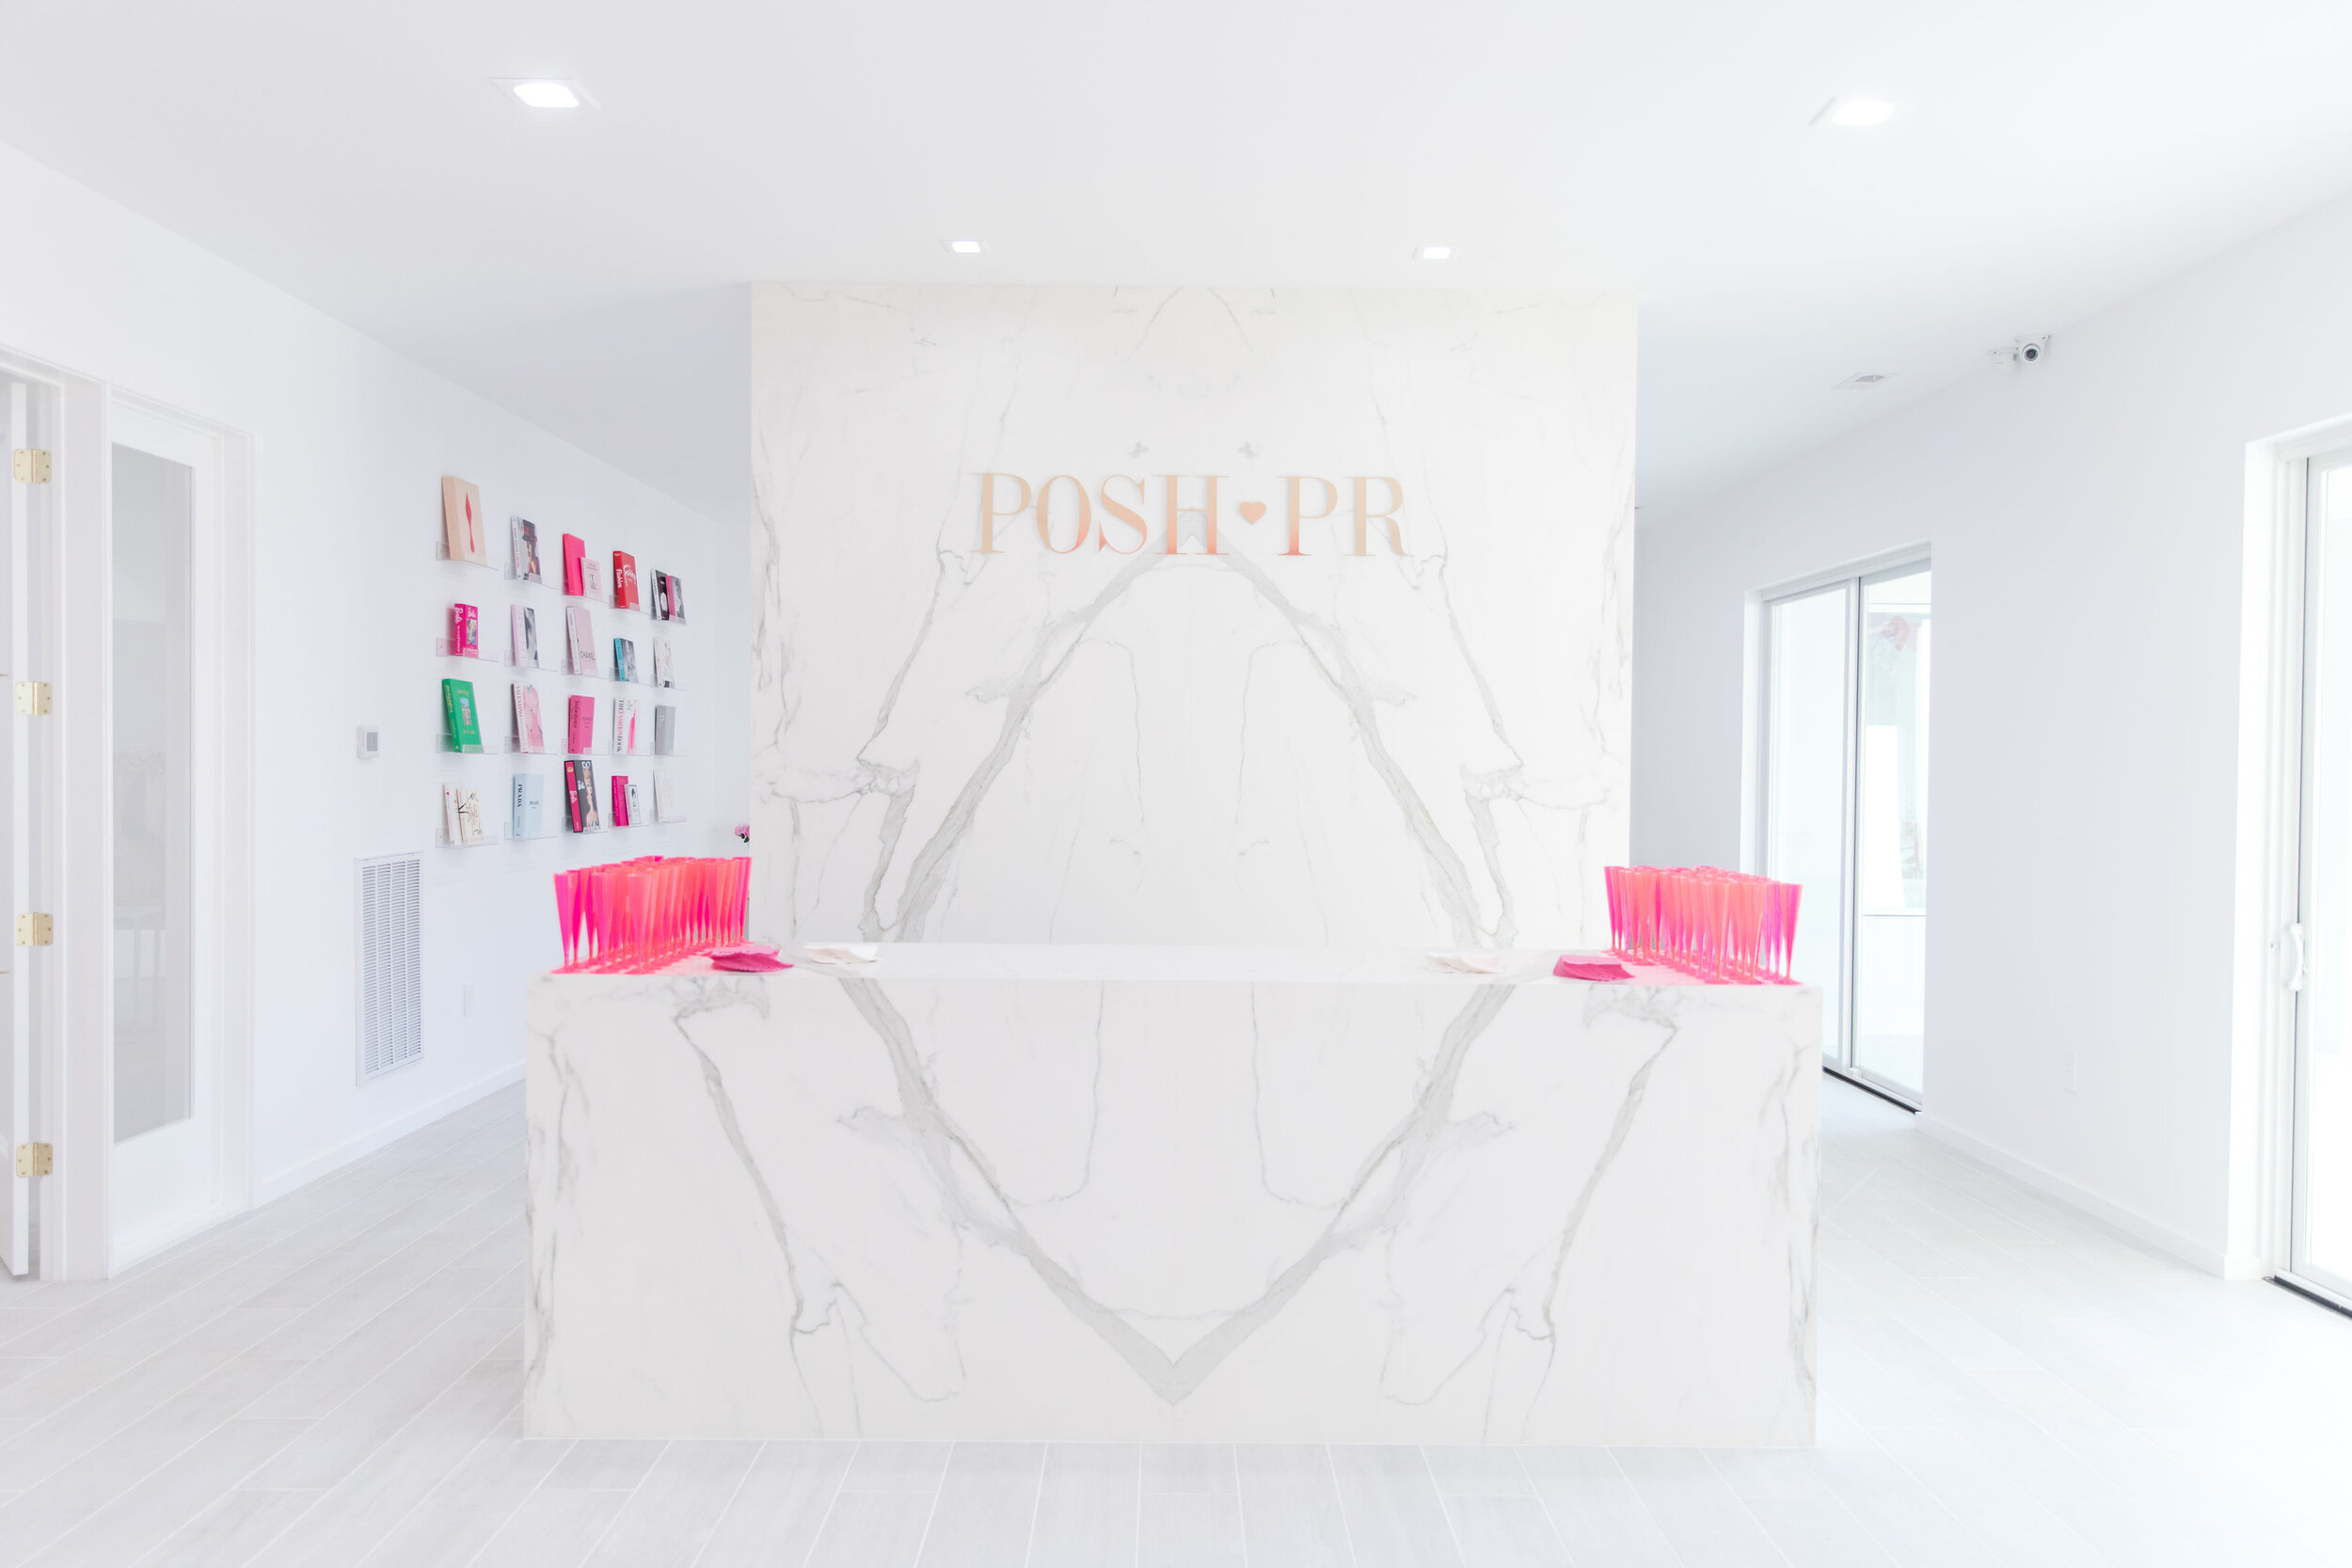 POSH-PR-The-Caroline-Doll-Barbie-Office-Pink-Style-Boss-Goals-At-Home-Workspace-Luxury-Fashion-Infused-Office-Champage-Is-Always-The-Answer-Bar-California-Closets-3.jpg